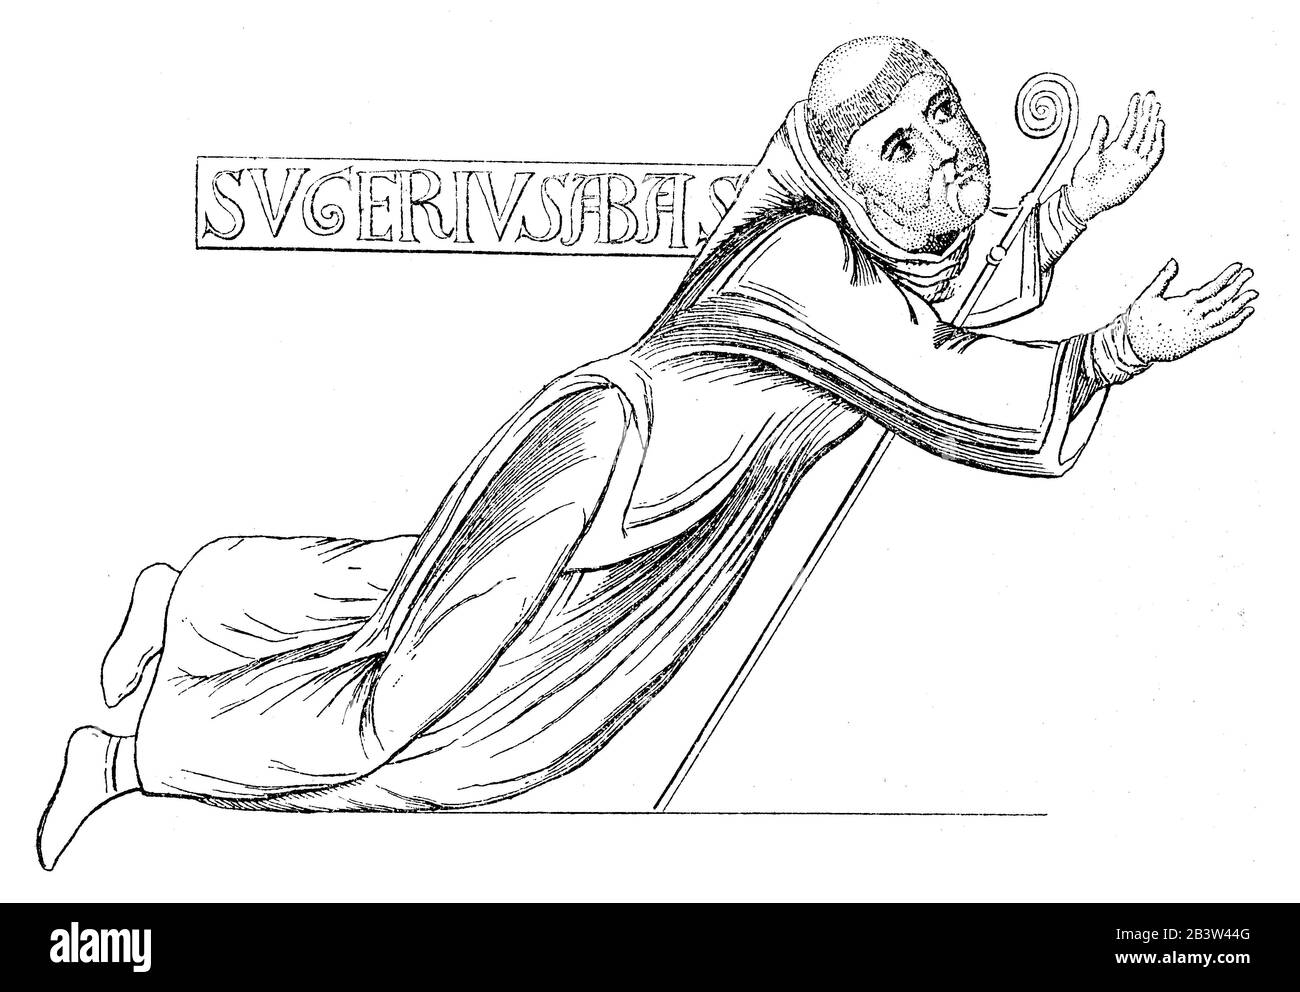 Suger (1081-1151), French church prince and statesman. After a stained glass painting in the choir of the church of St. Denis, built by Suger 1140-1145, ,  (history book, 1902) Stock Photo